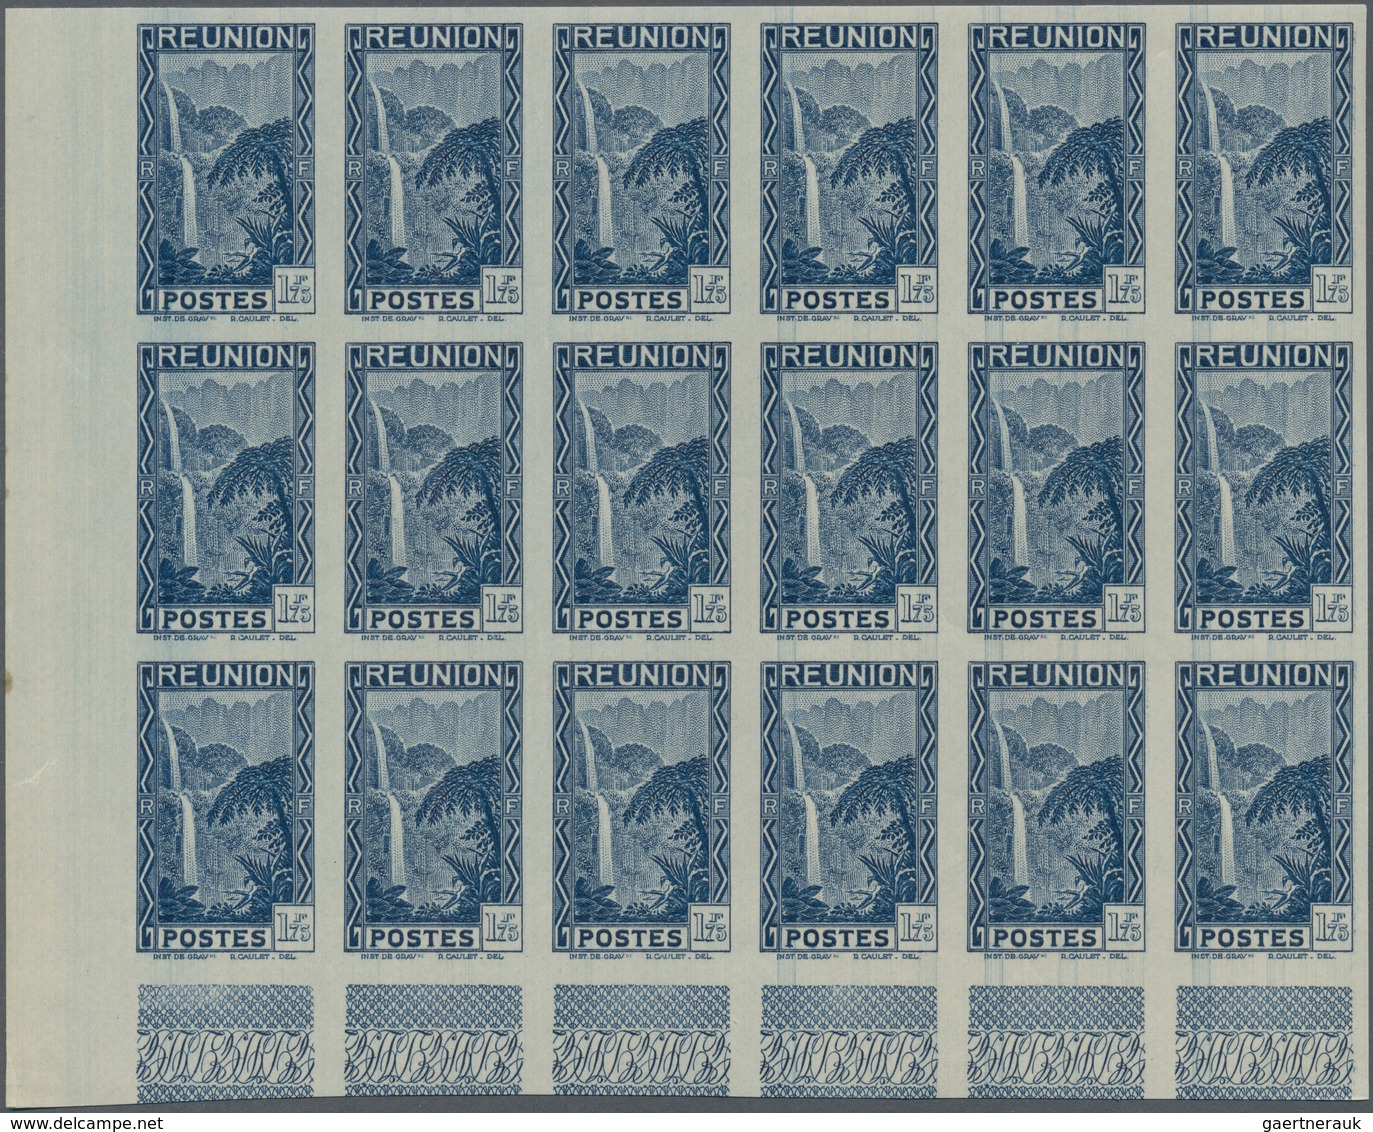 Reunion: 1938, Definitives Pictorials, 1.75fr. "Waterfall" IMPERFORATE, Marginal Block Of 18, Mint N - Unused Stamps